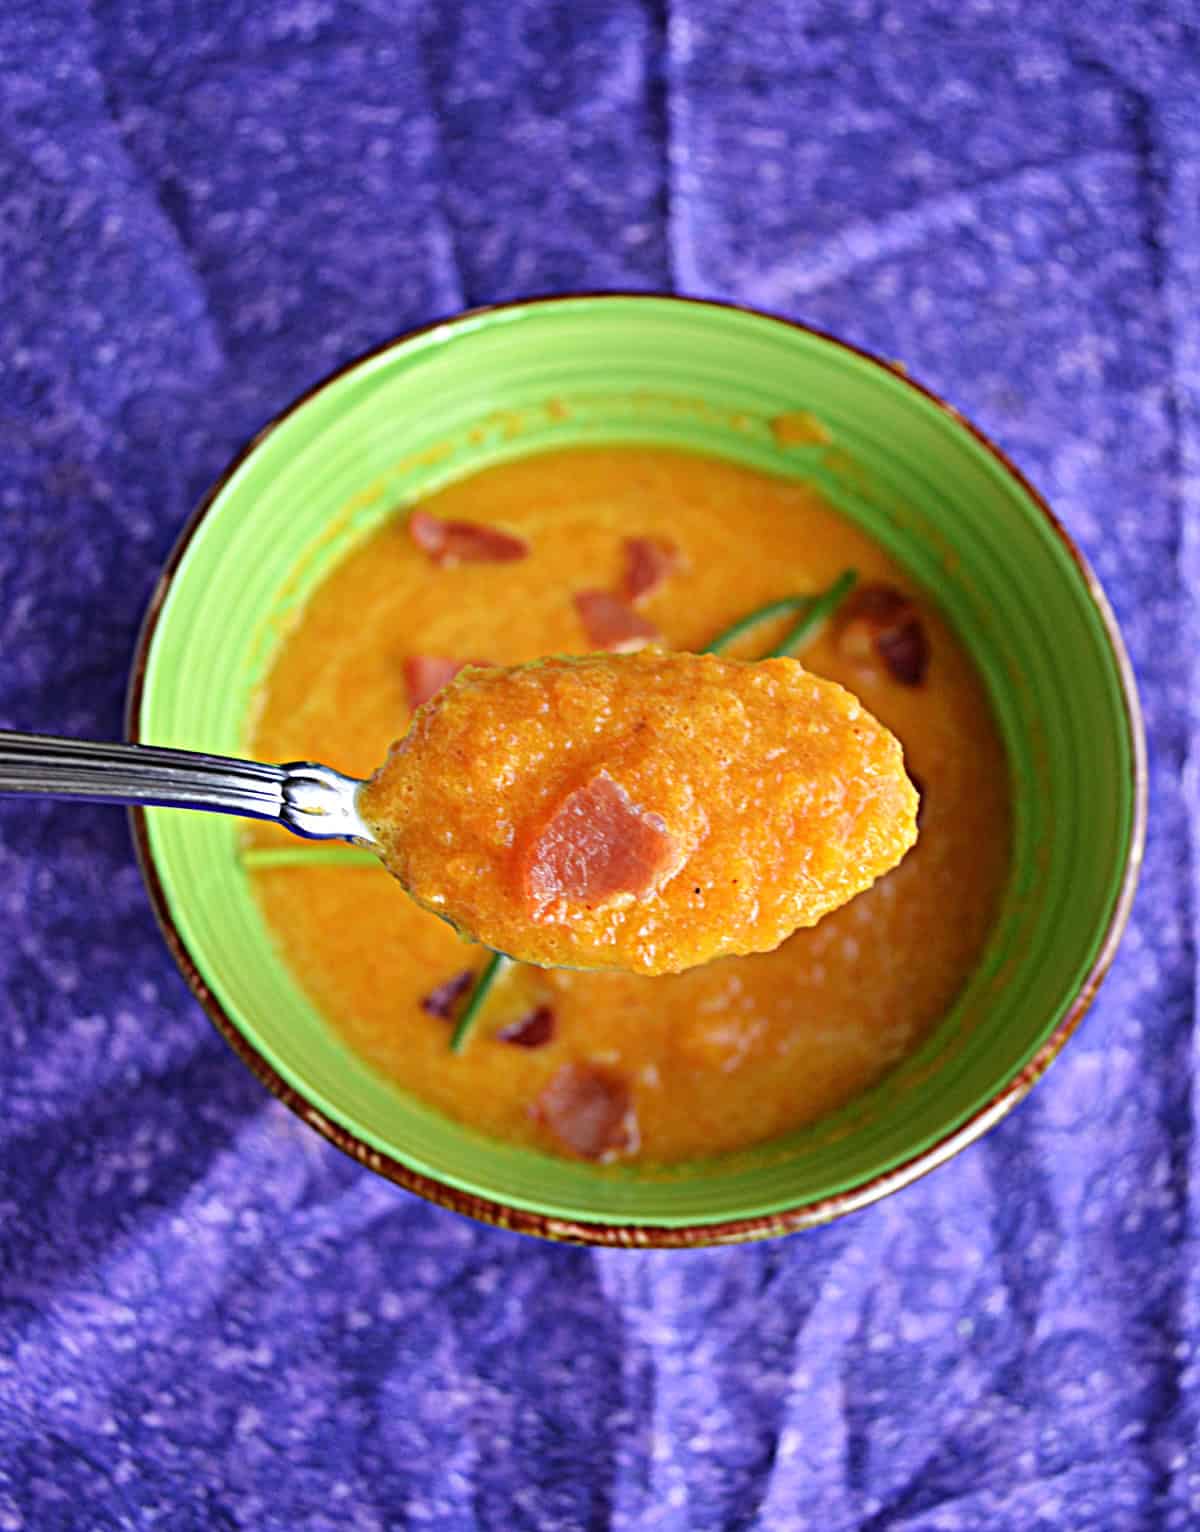 A bowl of carrot soup with a spoonful of the soup on a spoon.